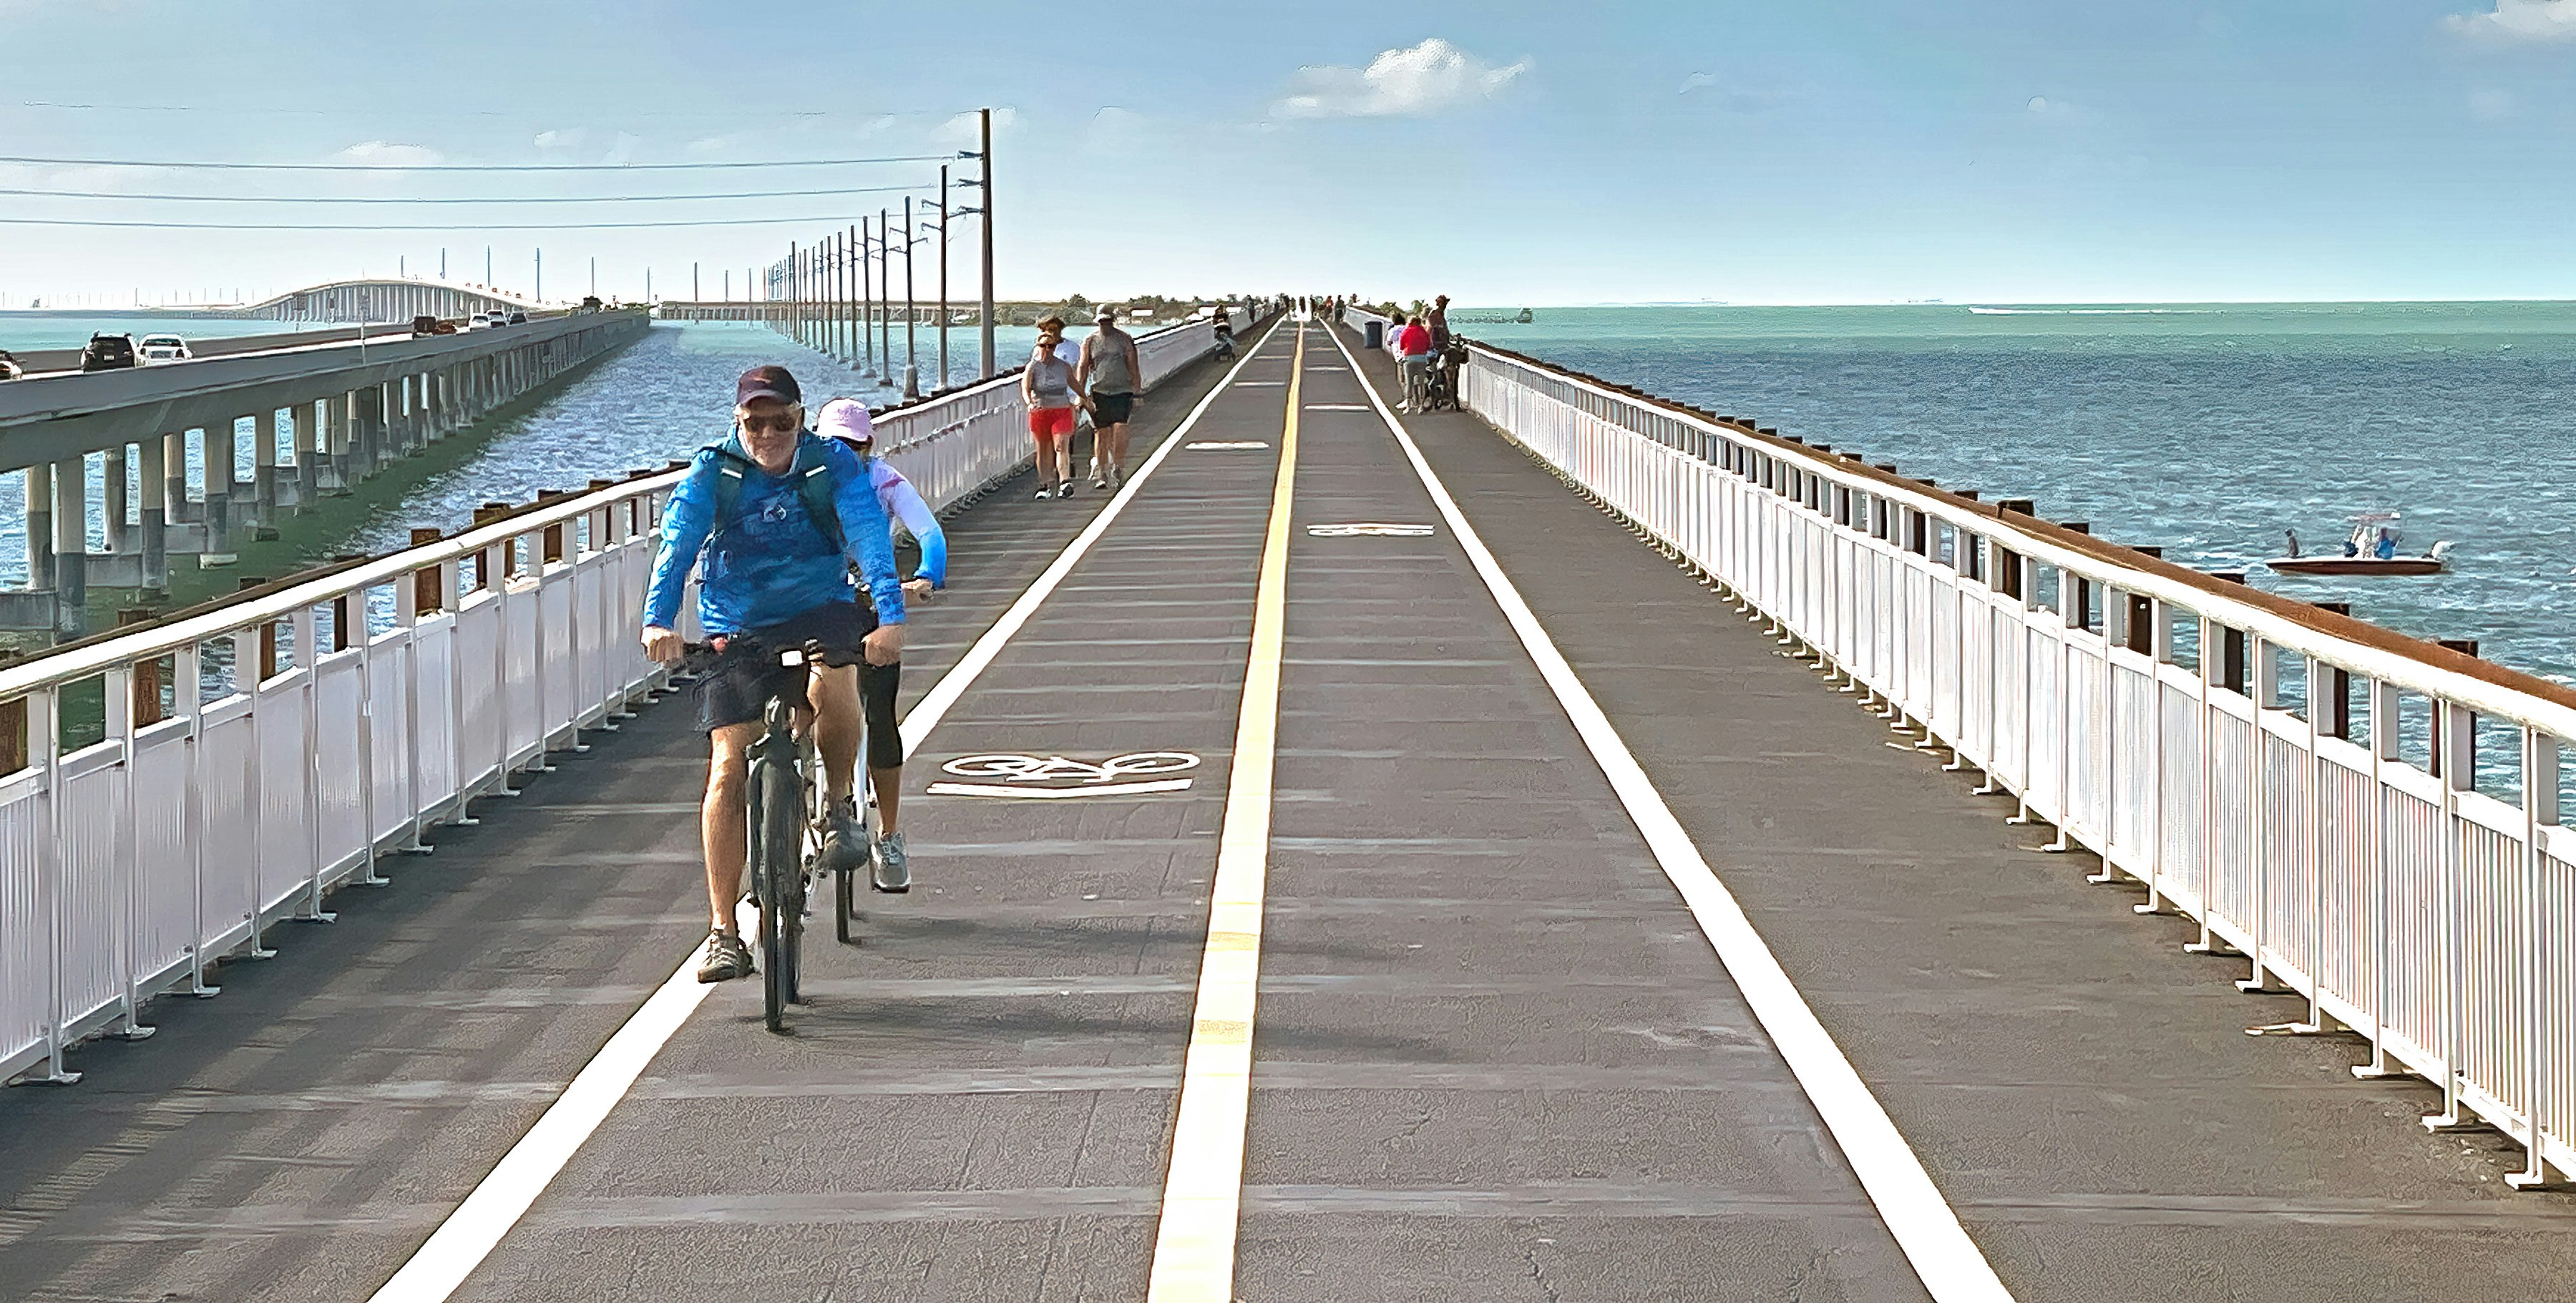 Visitors and residents bicycle and walk on the Florida Keys’ Old Seven Mile Bridge Wednesday, Jan. 12, 2022, in Marathon, Fla. The 110-year-old span formally opened Wednesday after a ceremony marked the completion of a four-year, $44 million restoration project. The old bridge originally was part of Henry Flagler’s Florida Keys Over-Sea Railroad that was completed in 1912. It later became the centerpiece of the Florida Keys Overseas Highway, but was replaced in 1982 with a new span. The old bridge is closed to vehicles but open to pedestrians and bicycles. FOR EDITORIAL USE ONLY (Andy Newman/Florida Keys News Bureau/HO)